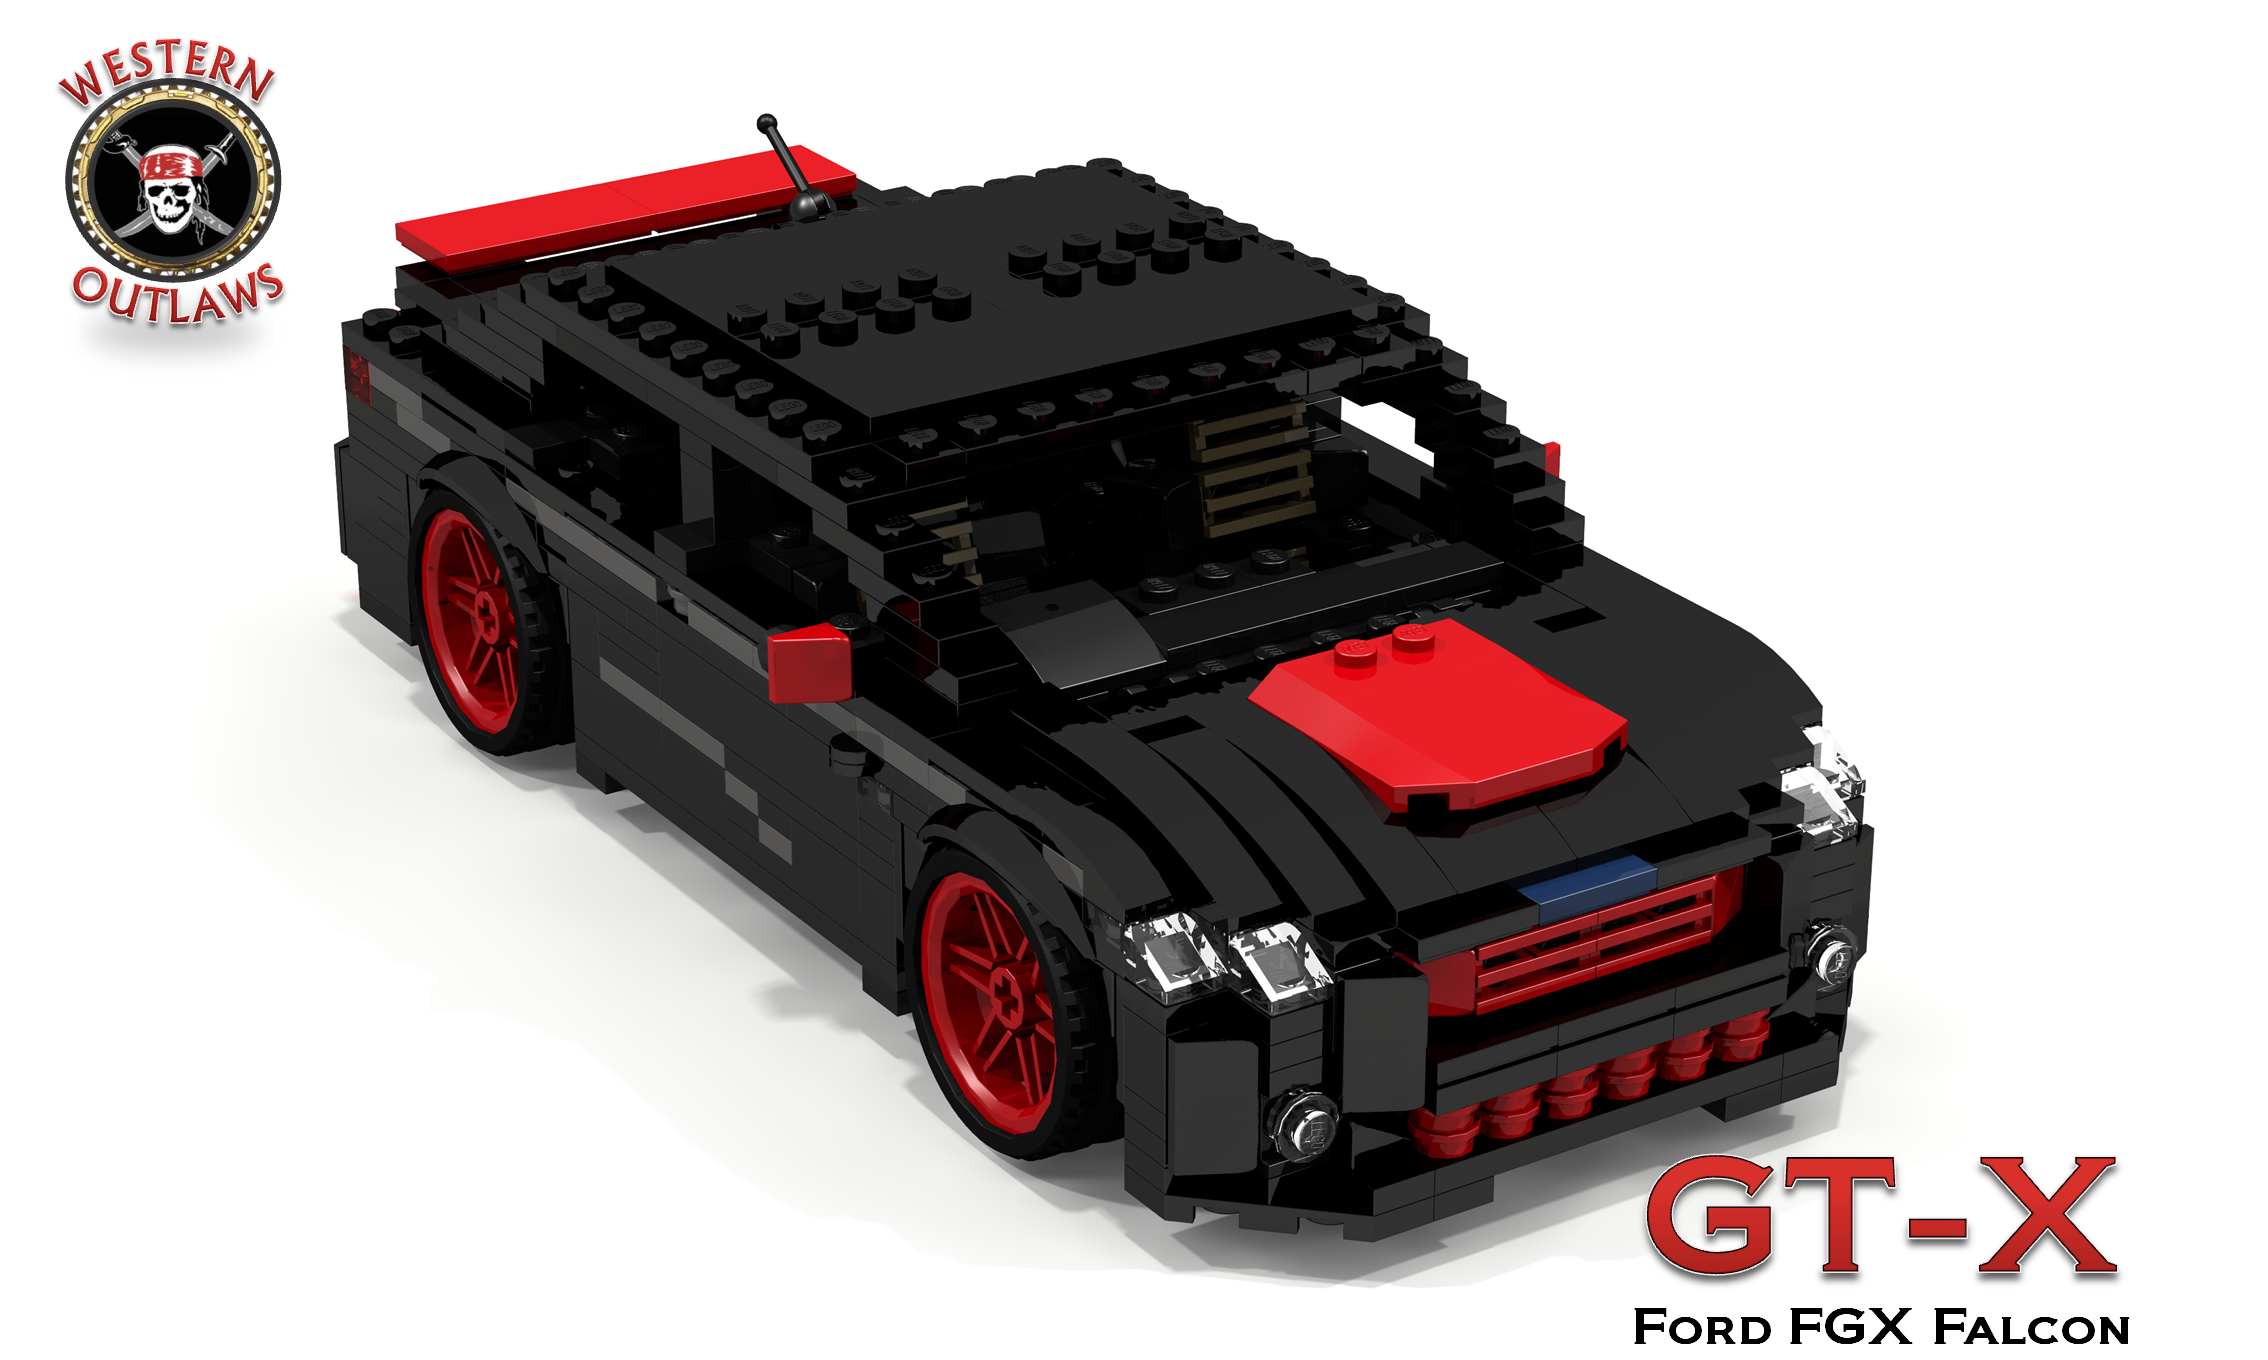 2015_ford_fgx_falcon_gt-x.png